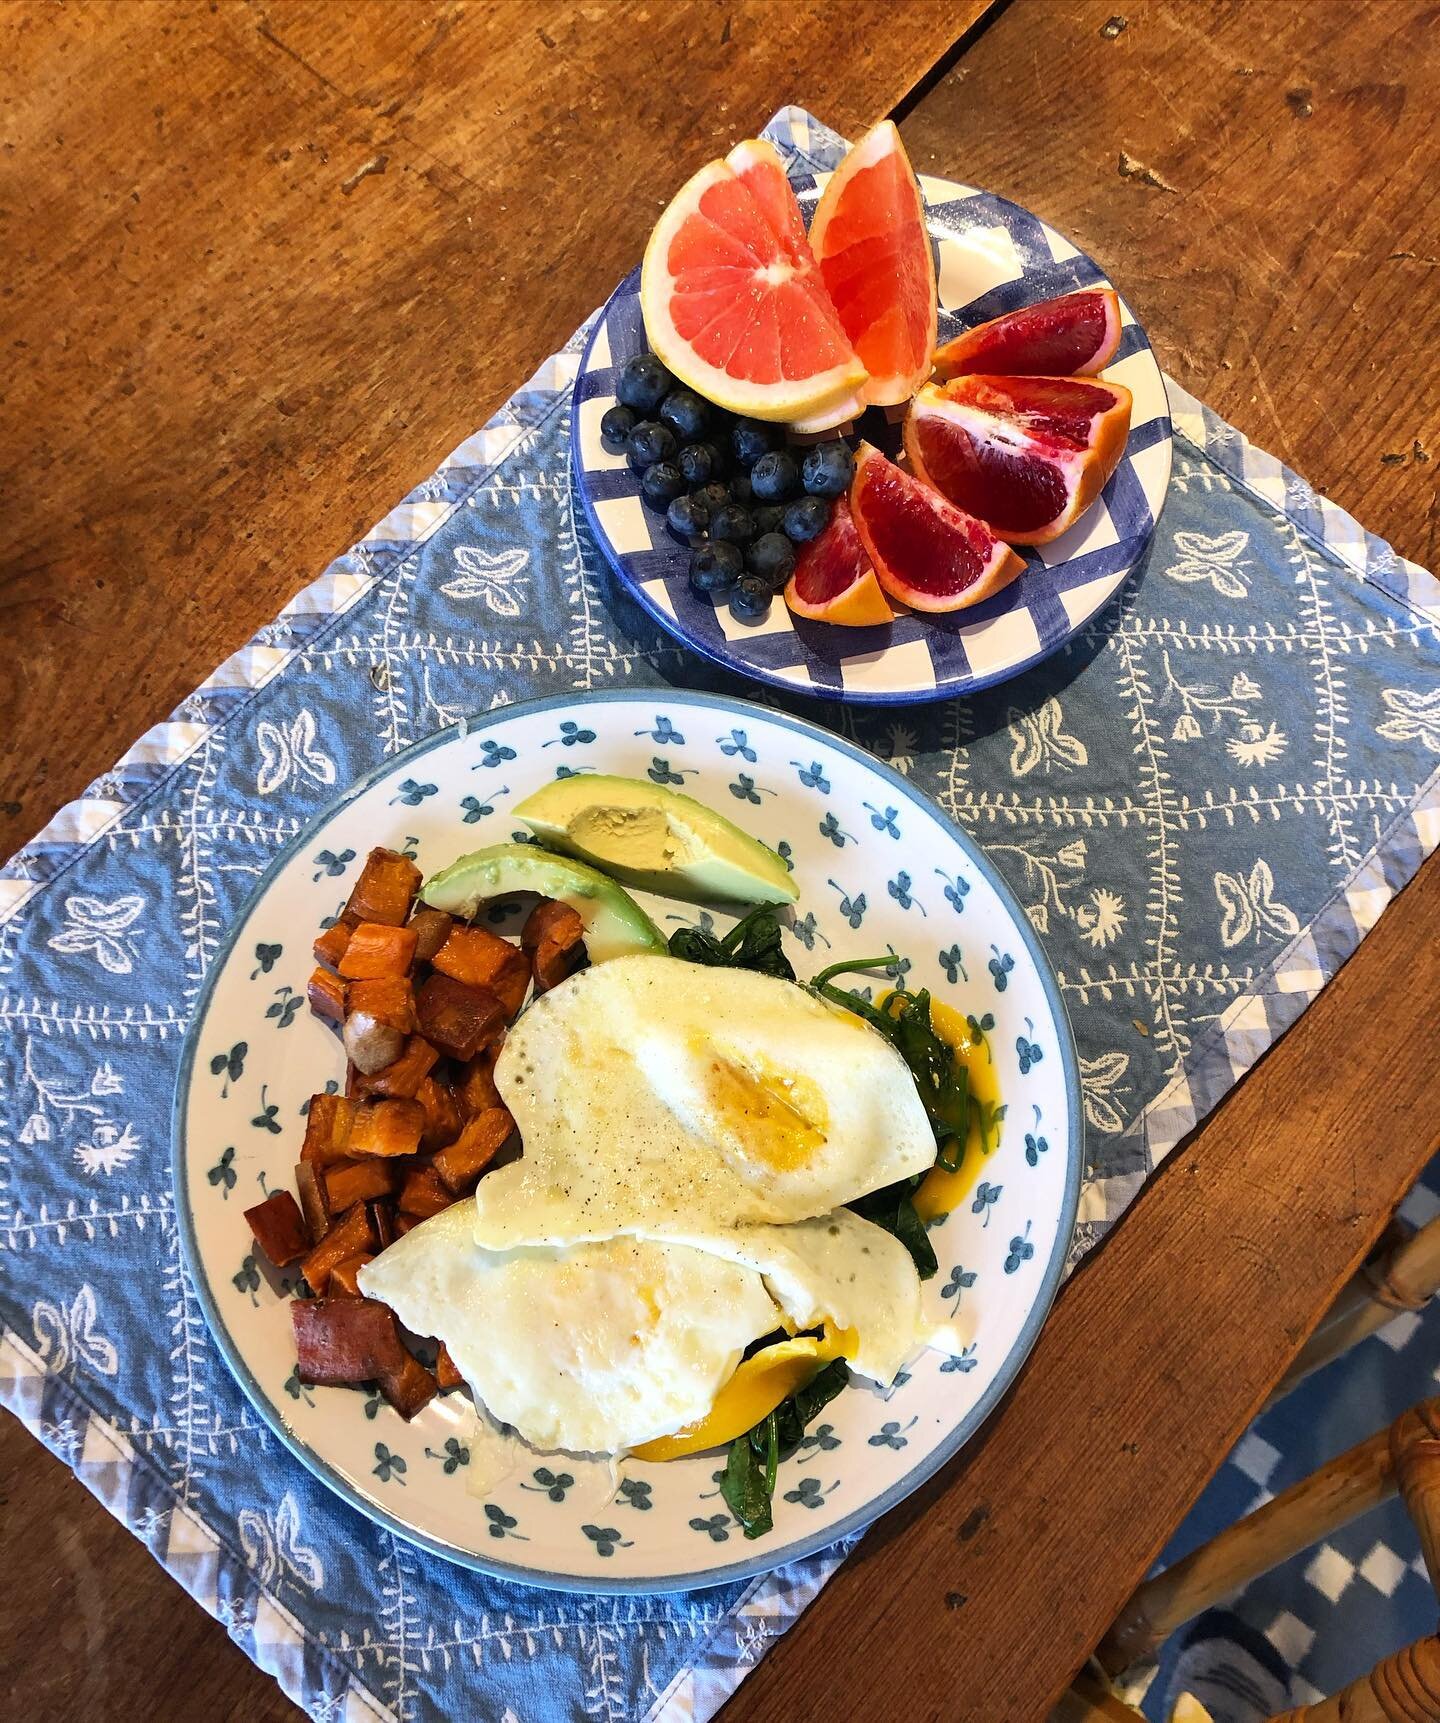 Sunday morning breakfast 😊Eggs, spinach, sweet potatoes, avocado and a side of fruit. We have oatmeal with fruit and almond butter most mornings so we like to add a little more excitement to our weekend breakfasts! What&rsquo;s your favorite way to 